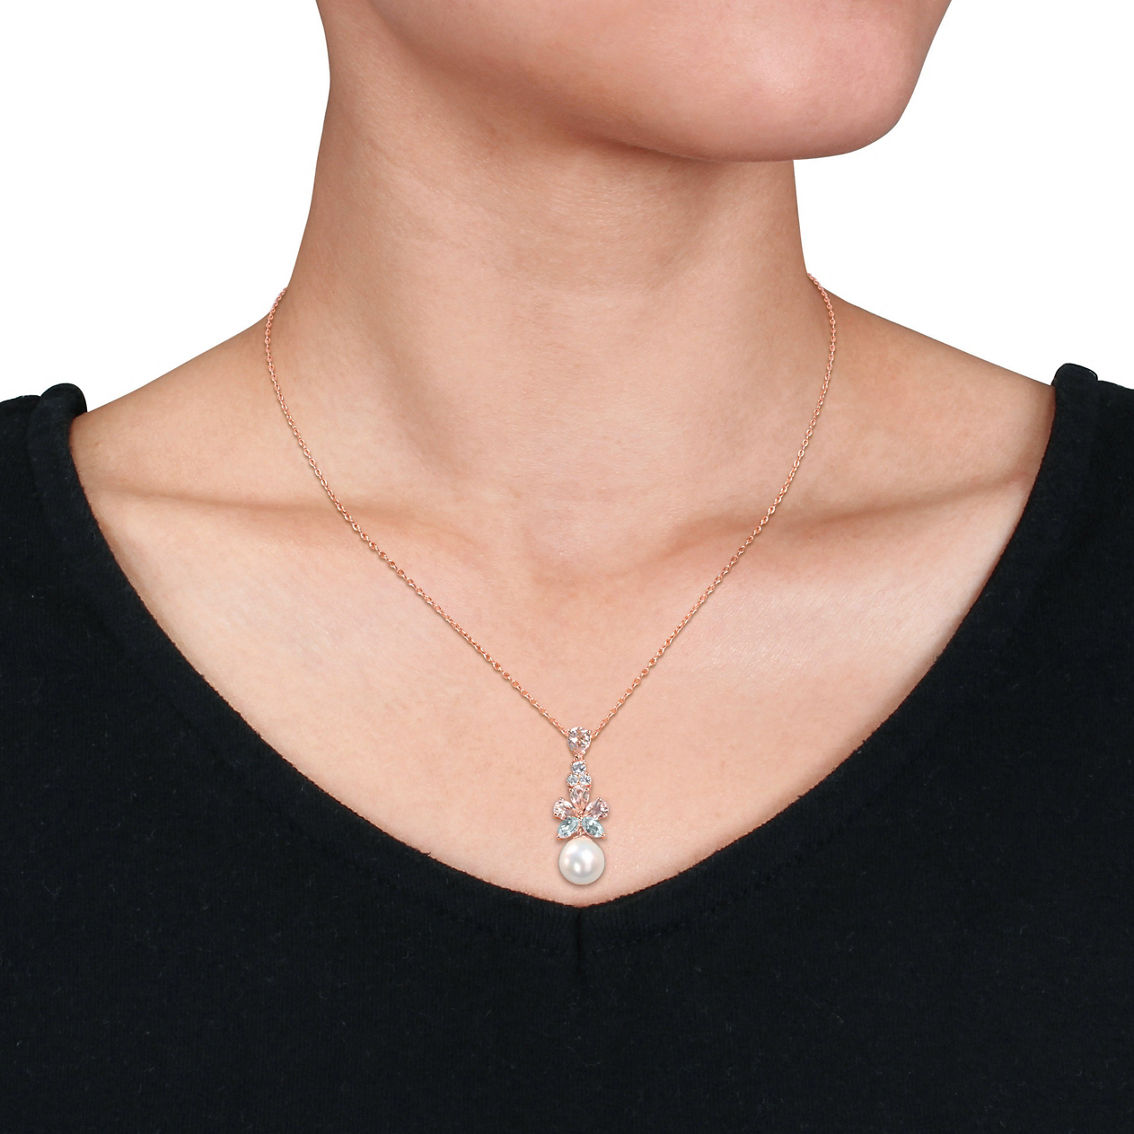 Sofia B. Cultured Freshwater Pearl Gemstone Drop Necklace & Earrings 2 pc. Set - Image 2 of 4